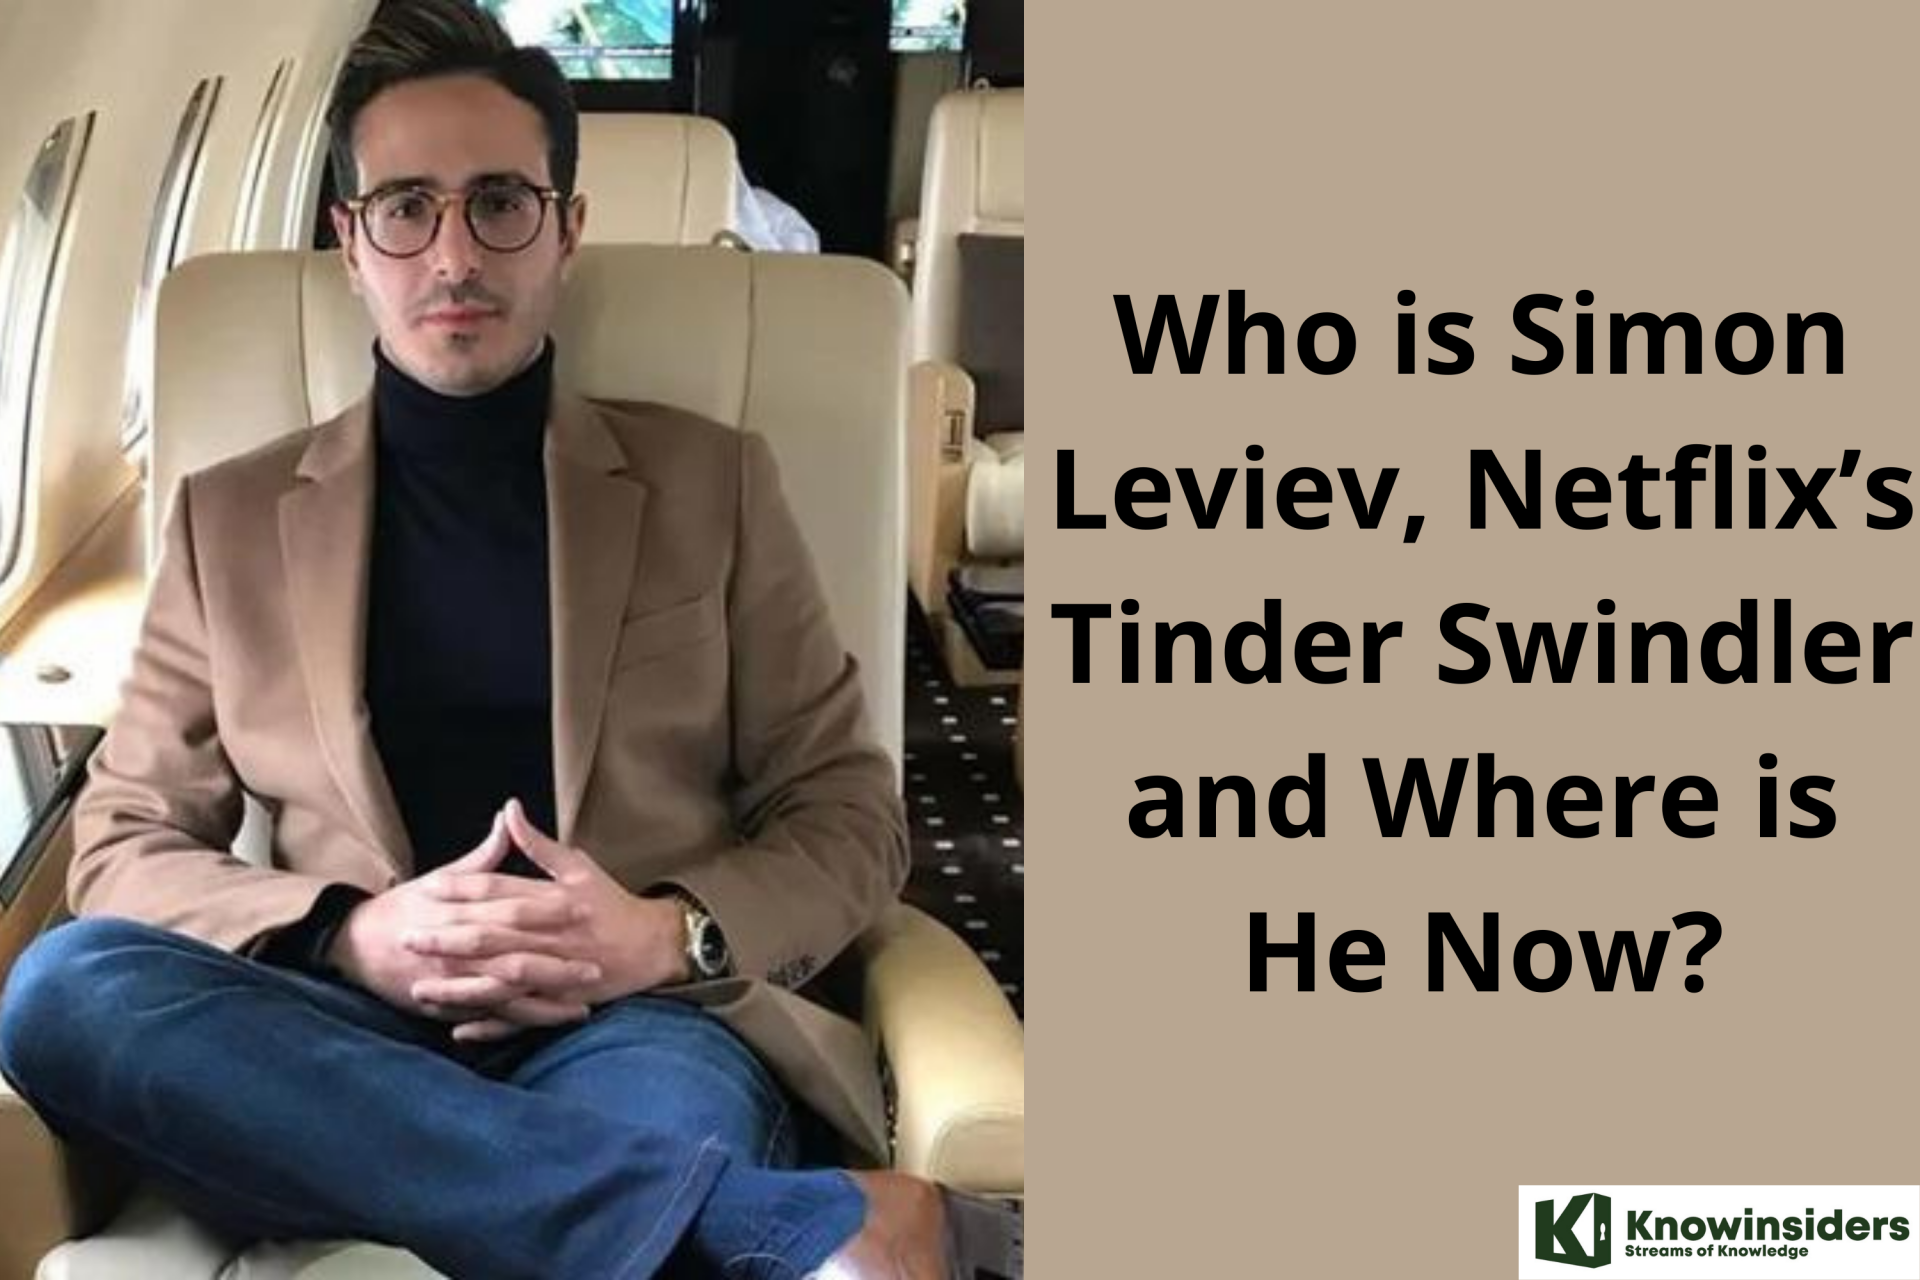 where is simon leviev netflixs tinder swindler and what he doing now